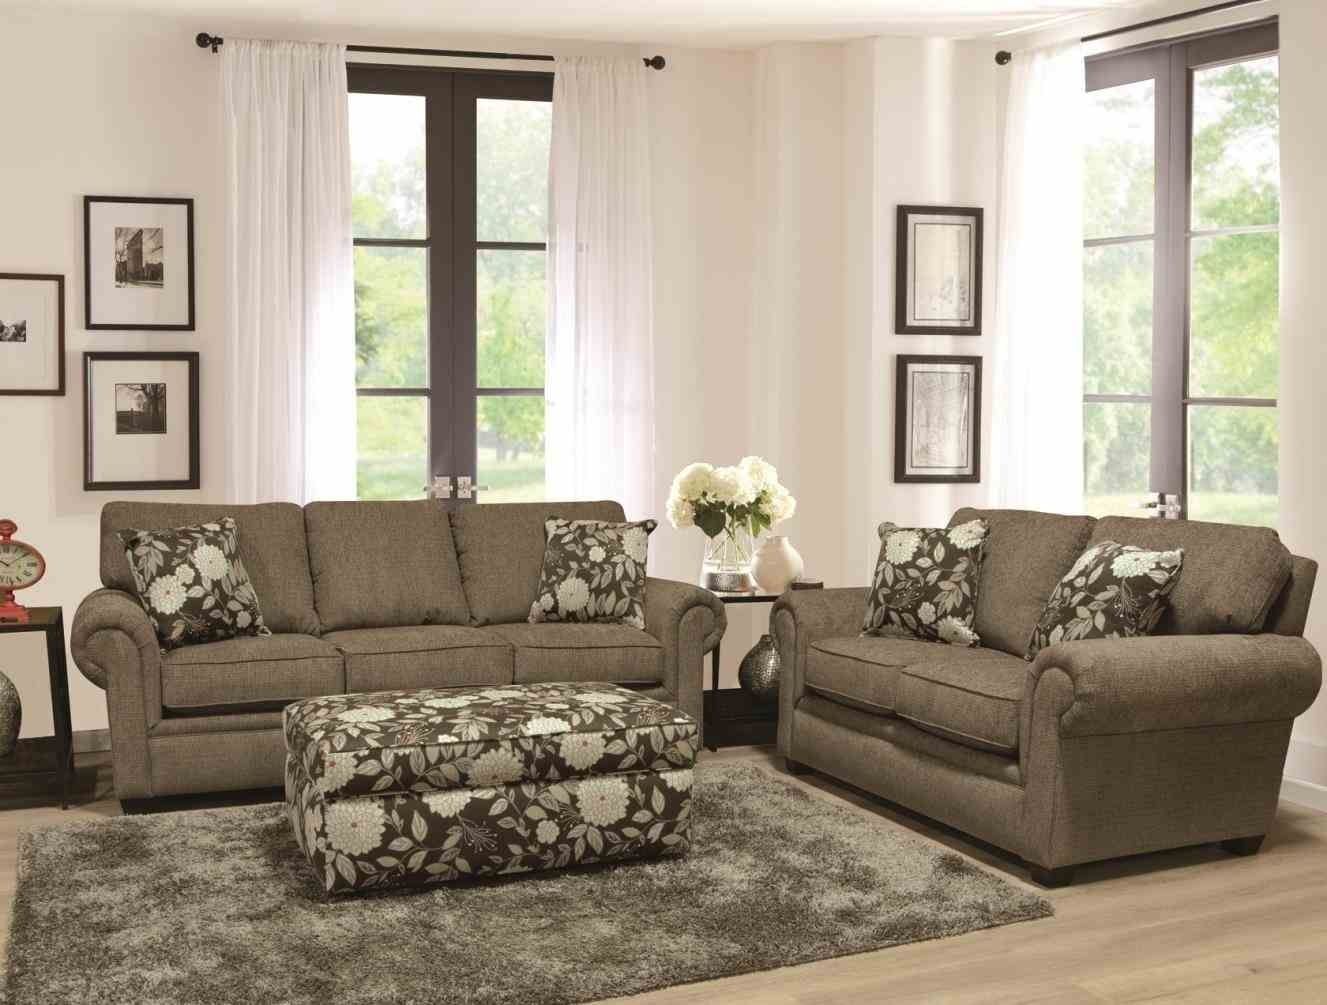 Justin Salem Meyer Des Moines Iowa Wedding And Fabric Sectional Throughout Des Moines Ia Sectional Sofas (View 9 of 10)